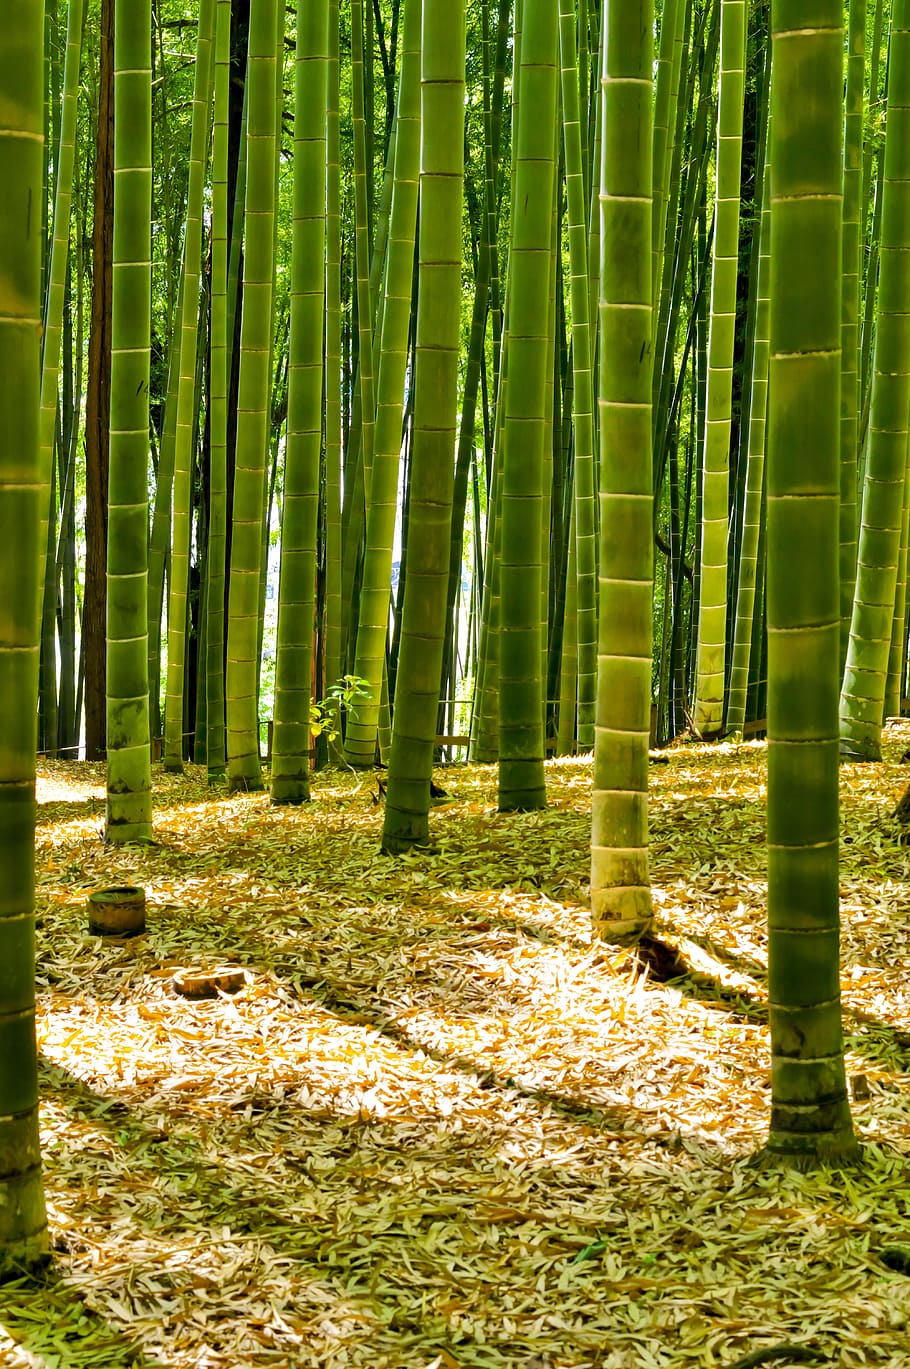 green bamboo trees, Japan, Forest, bamboo forest, natural, landscape